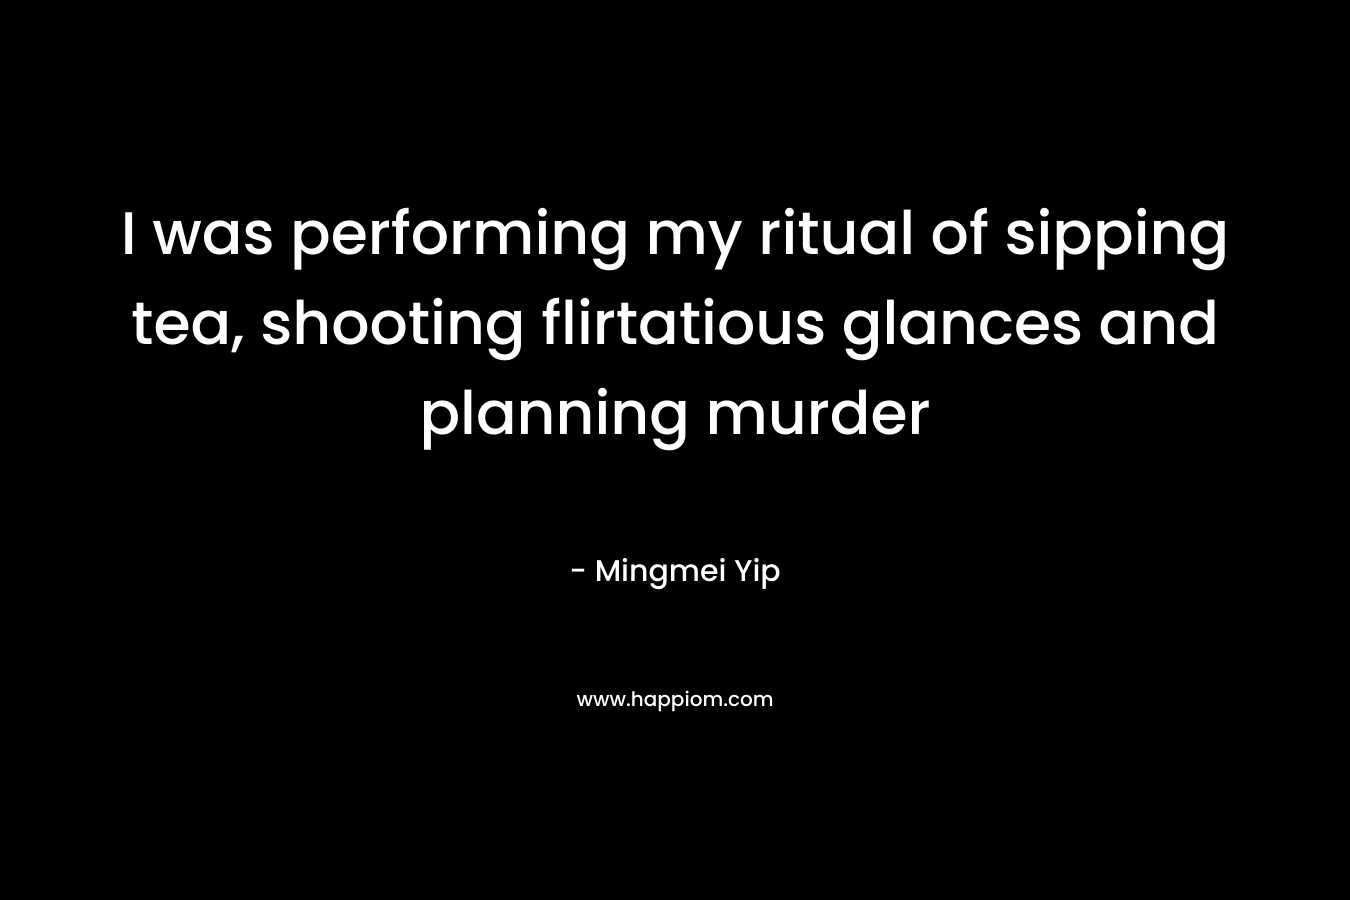 I was performing my ritual of sipping tea, shooting flirtatious glances and planning murder – Mingmei Yip